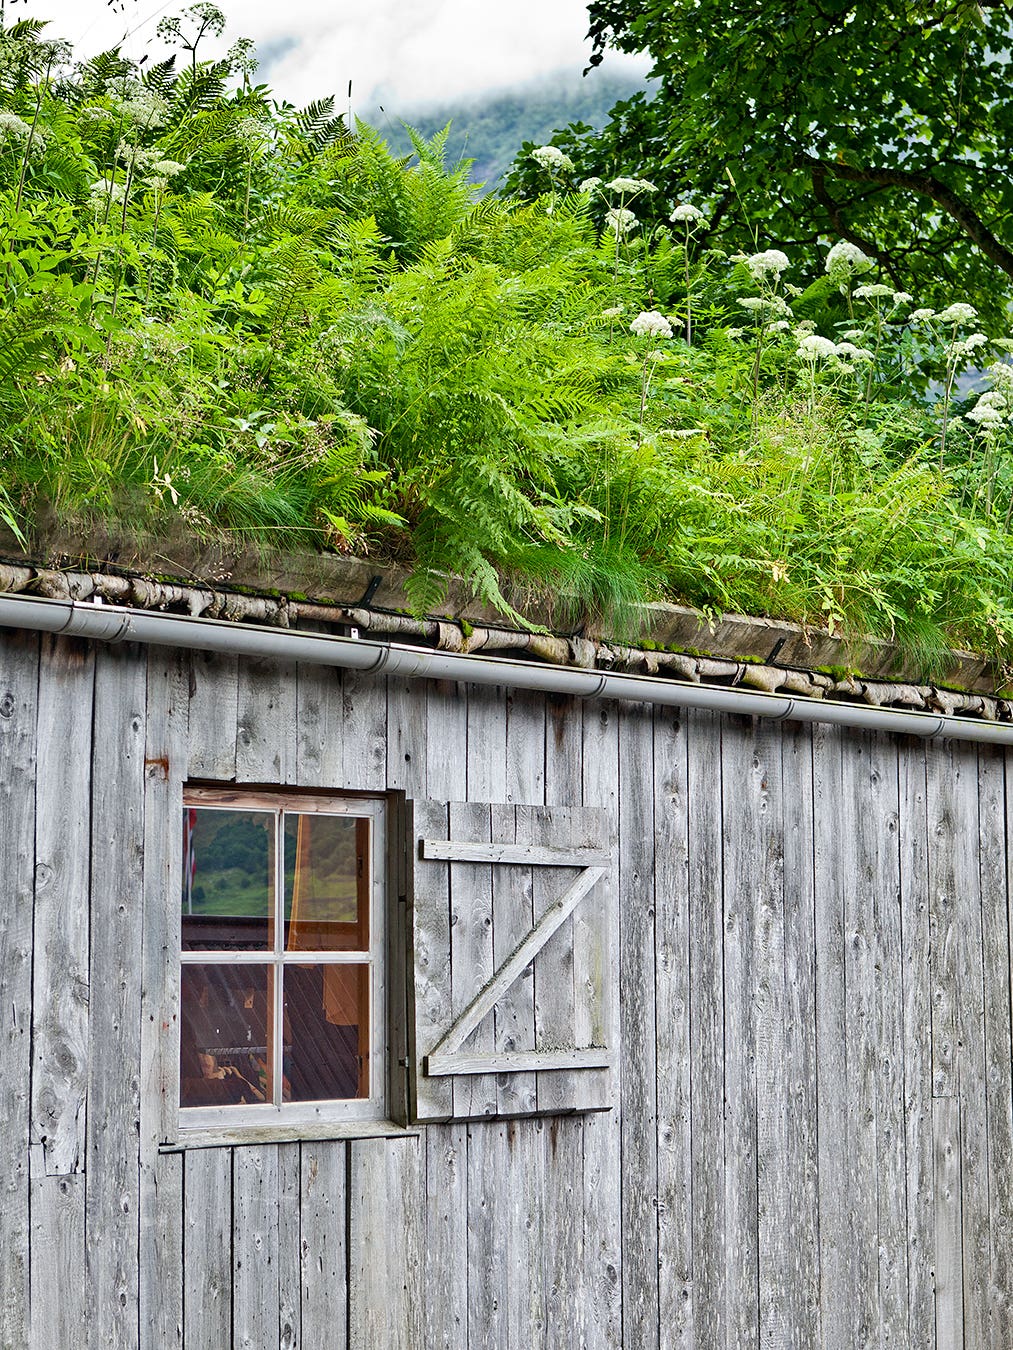 wood shed covered in grass